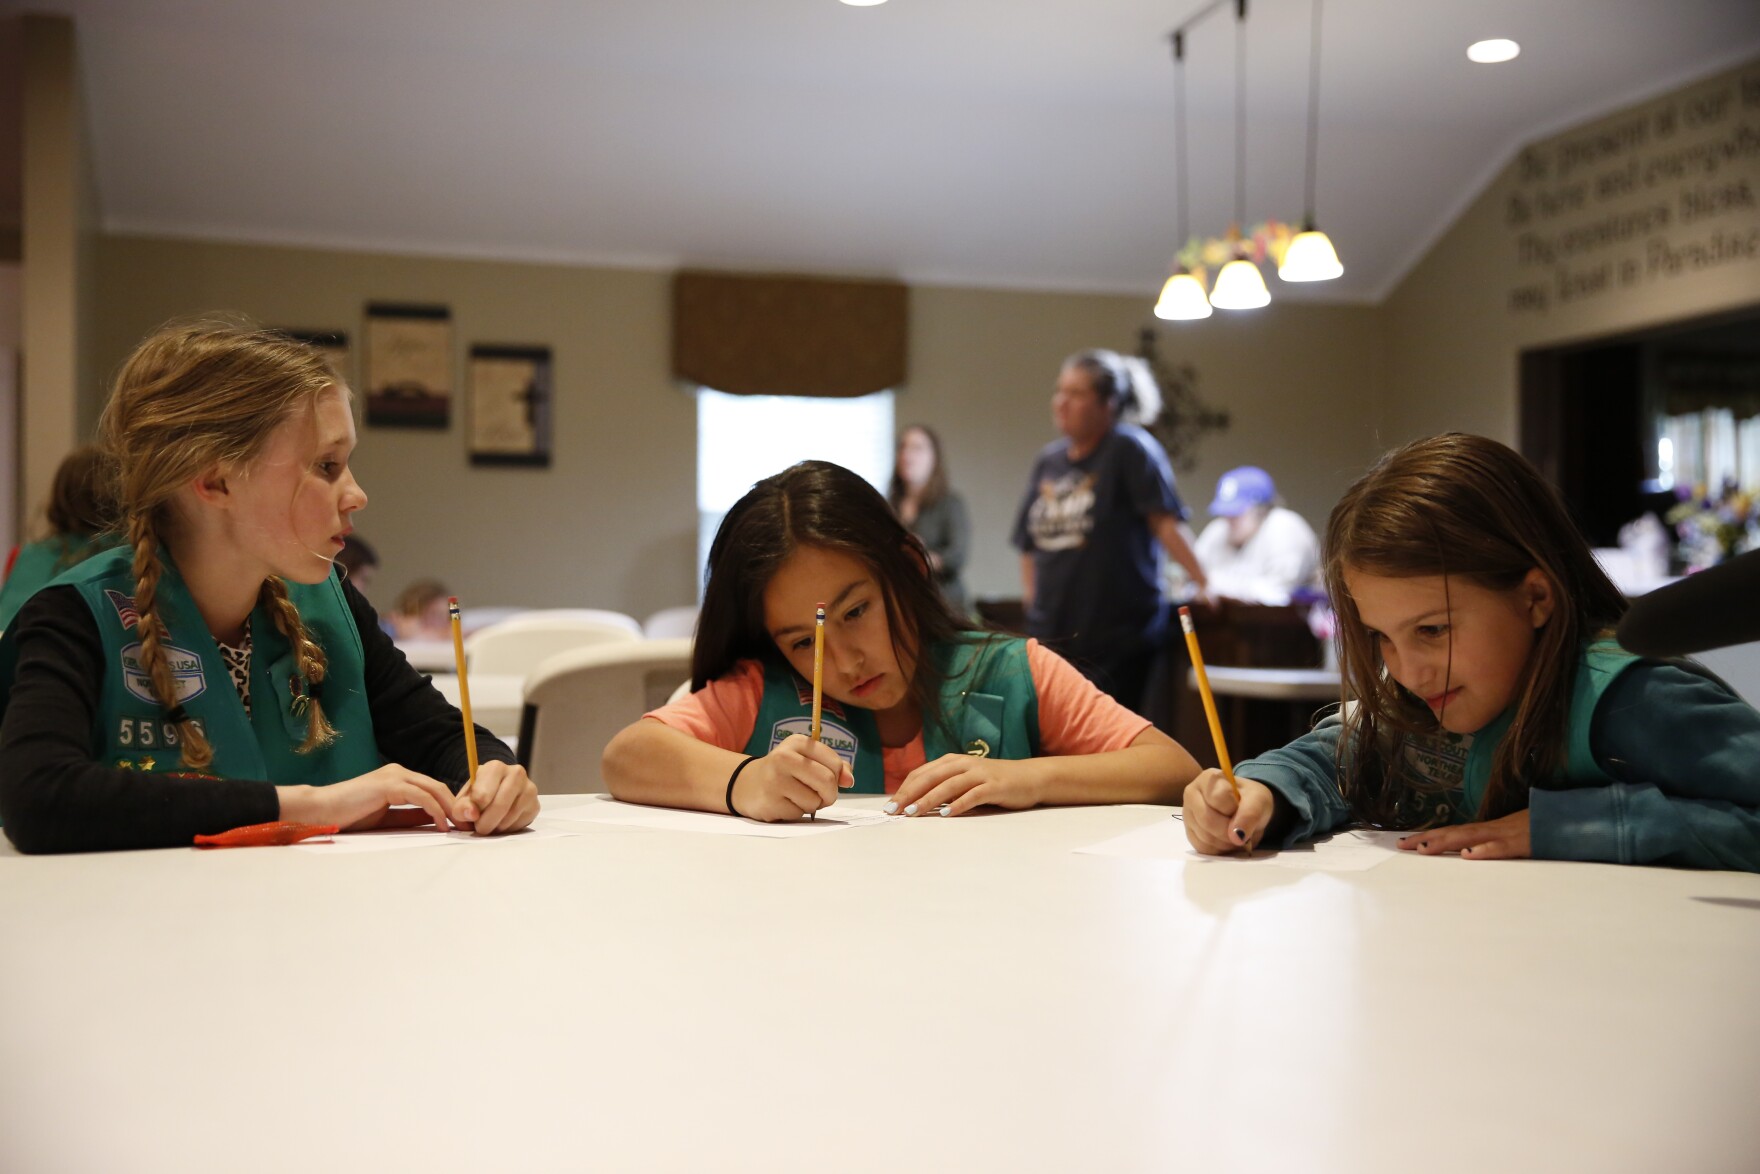 McKinley Reid, Audrianna Guerrero and Sydney Judge are all part of Girl Scout Troop 5596. They started working on activities for their Okay to Say mental health badge in April. "We were learning about stress and empathy and gratitude," Judge explained. ©Trevon McWilliams/KERA